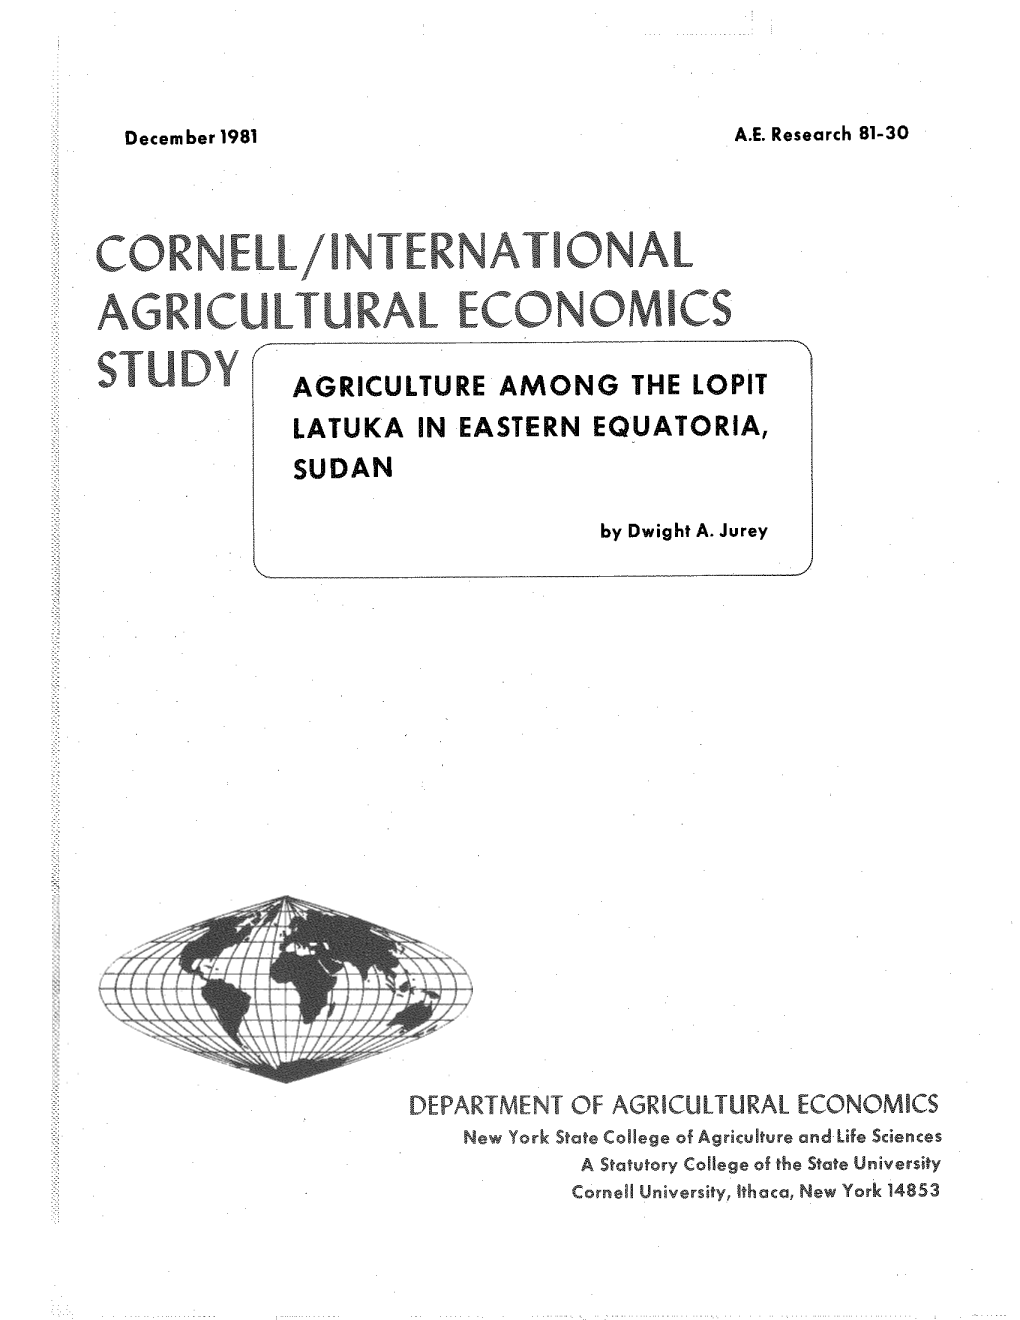 Cornell/International Agricultural Economics Study Agriculture Among the Lopit Latuka in Eastern Equatoria, Sudan